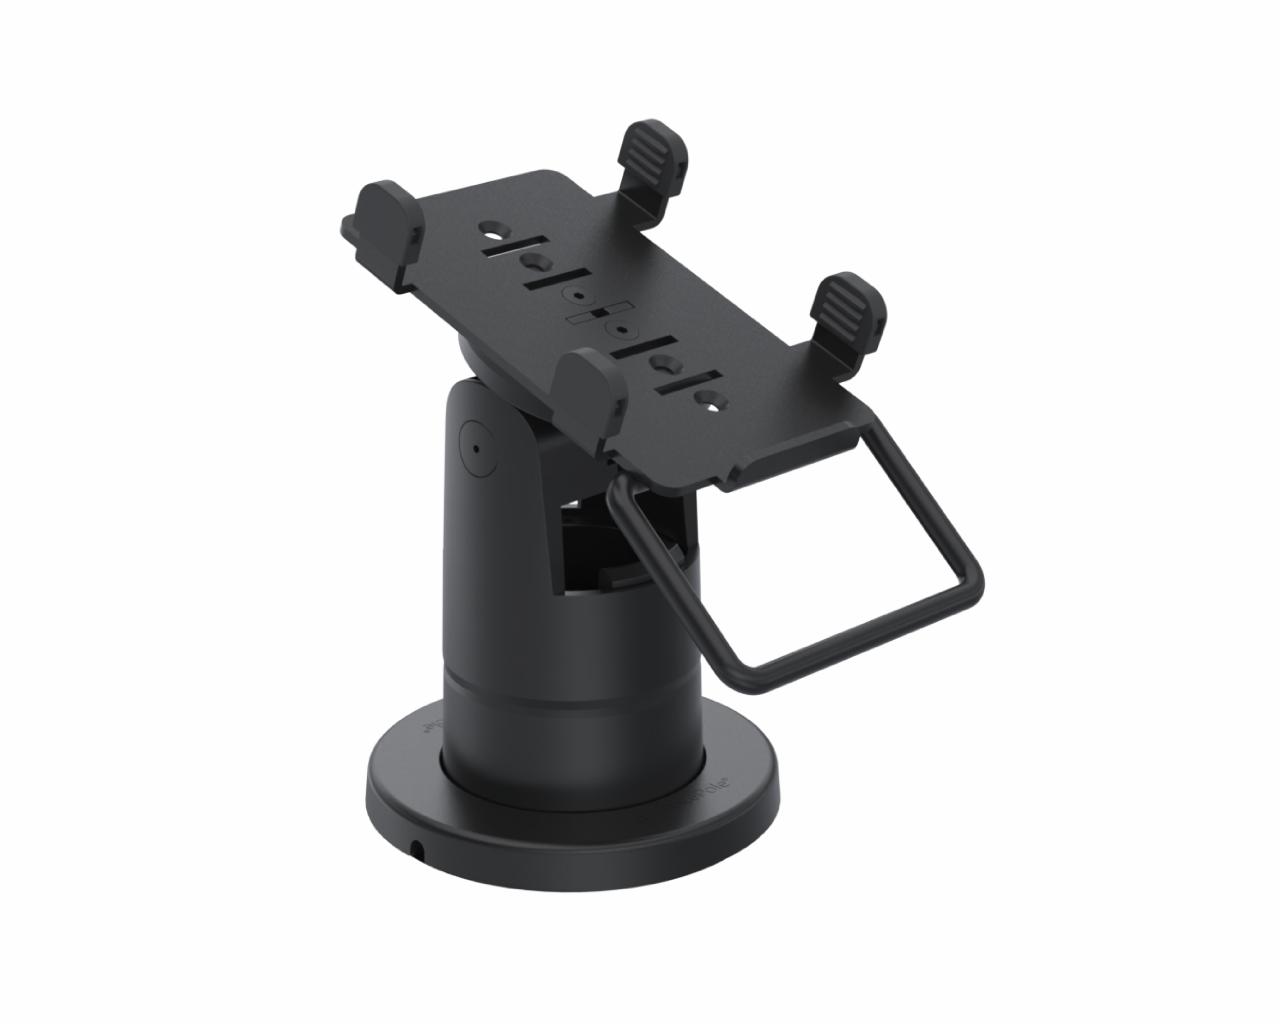 SpacePole Stack® with MultiGrip™ plate for VeriFone VX675